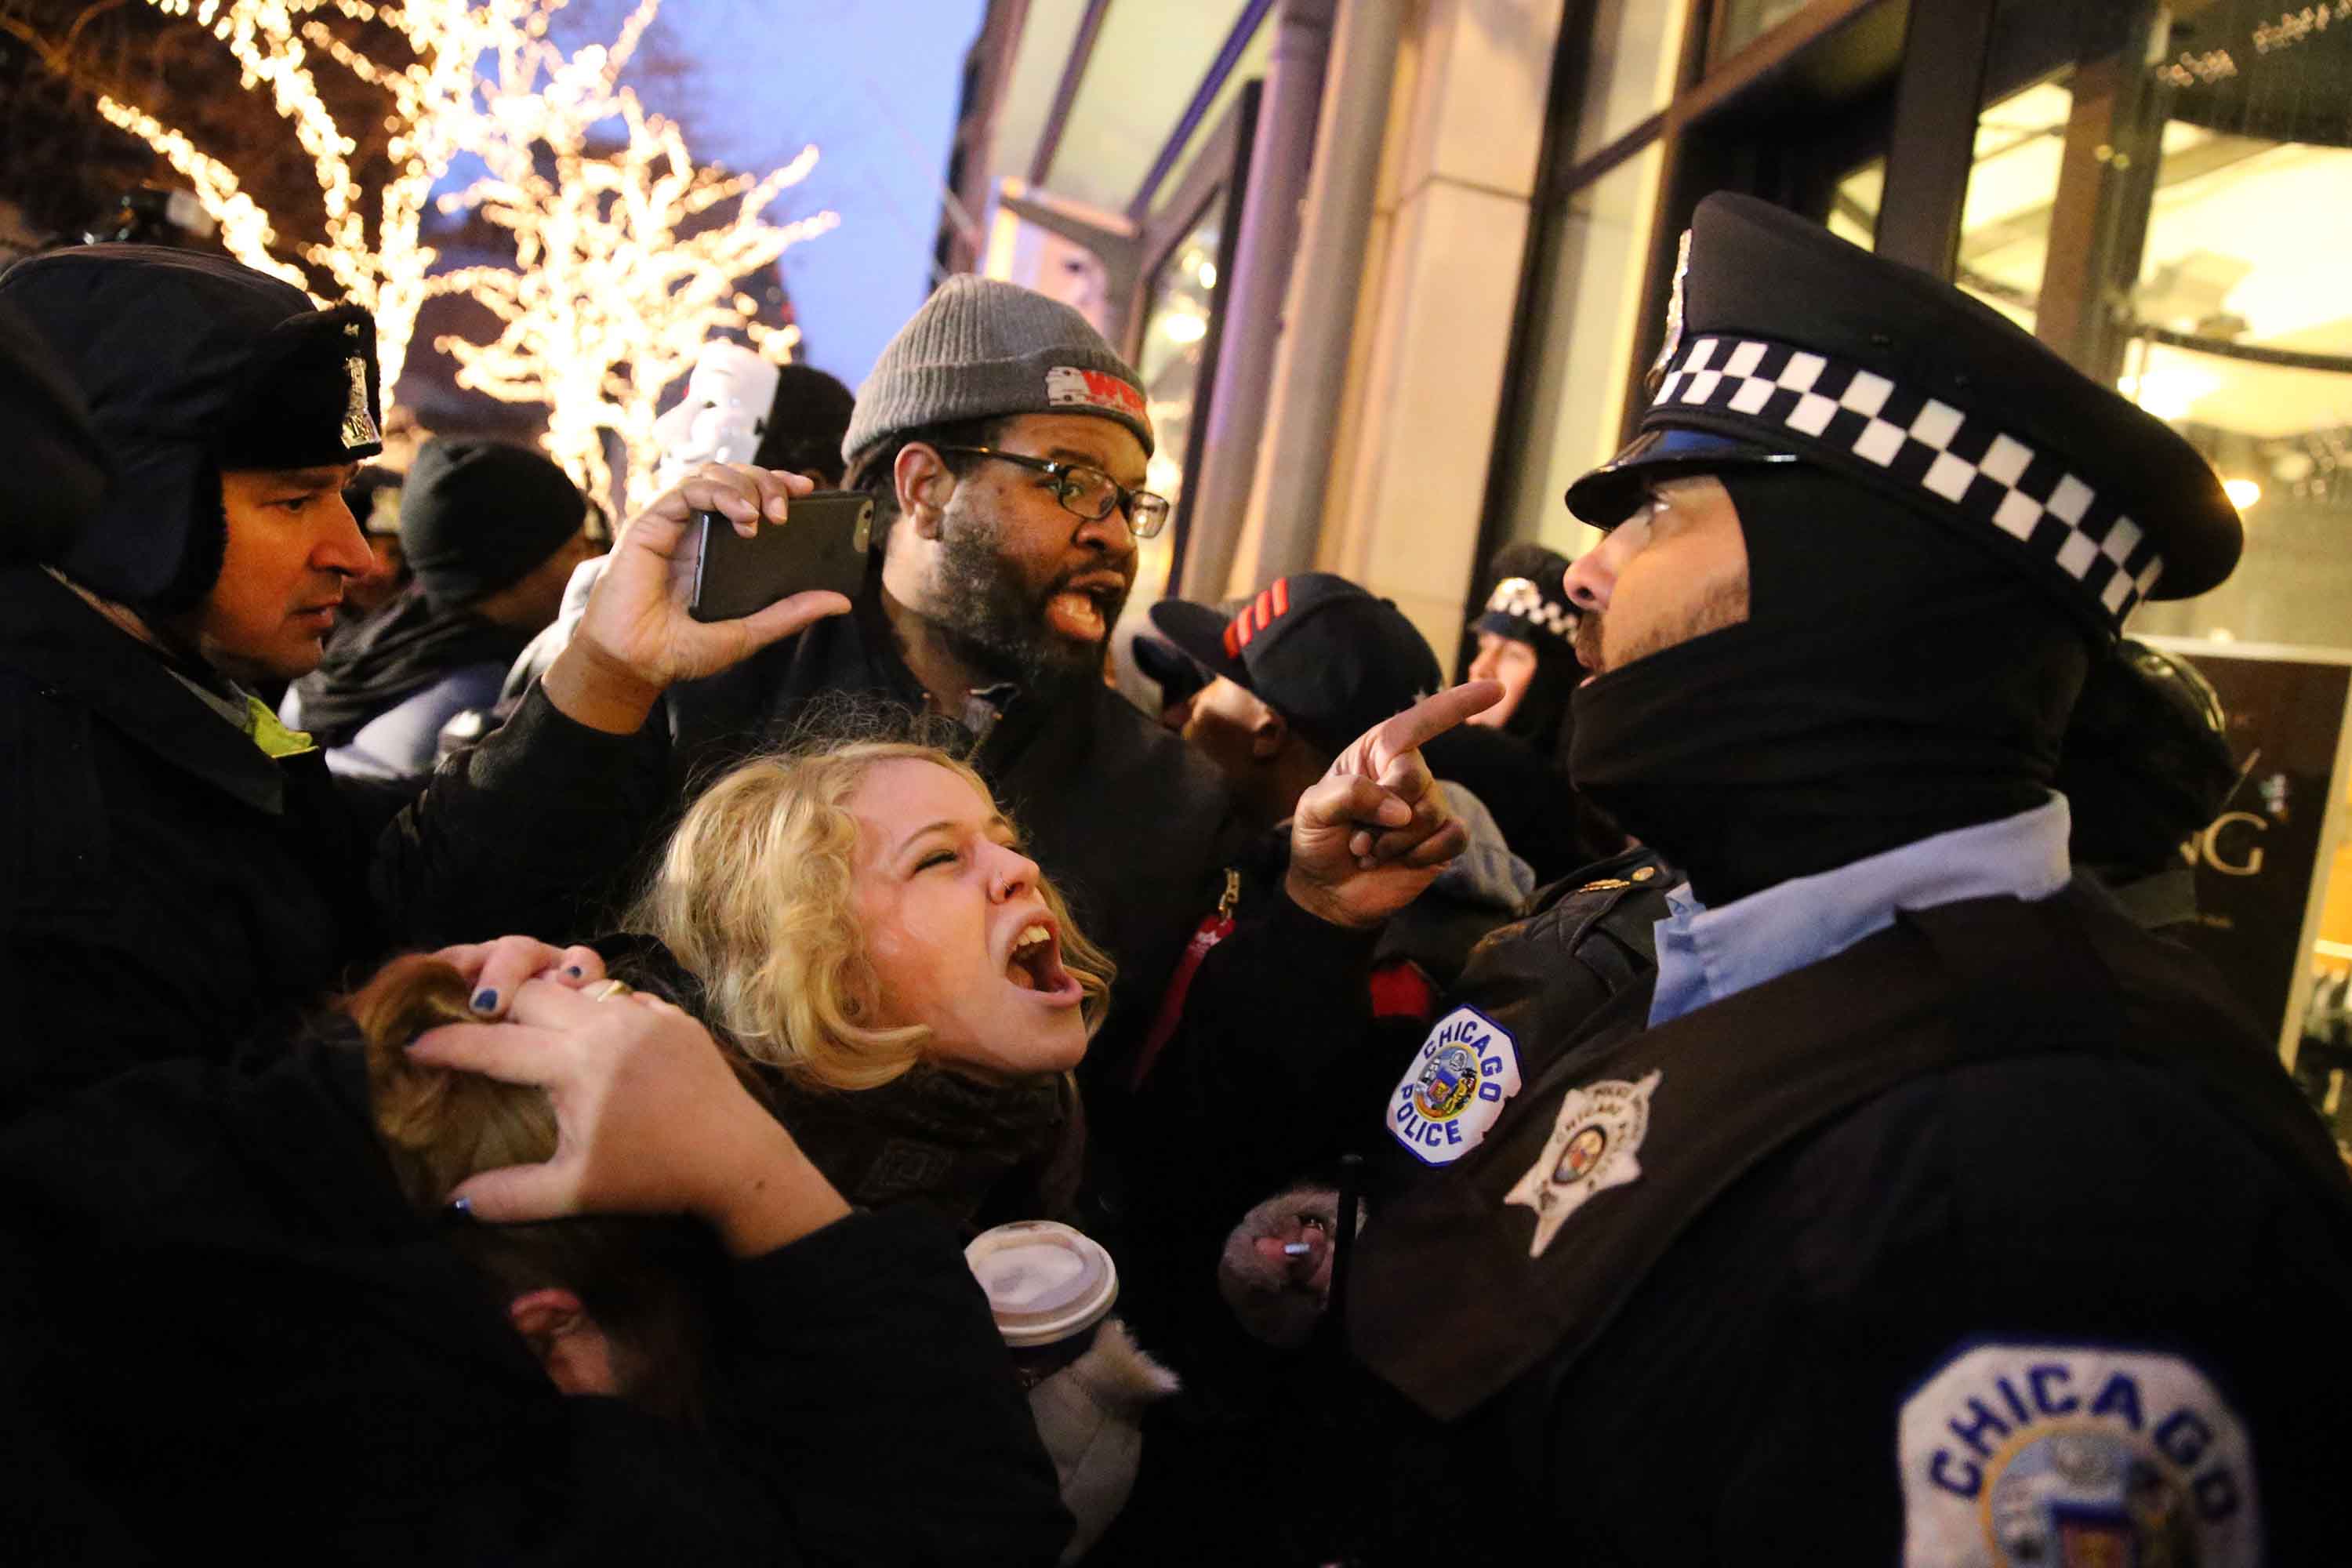 People scream at cops as they protest the shooting death of Laquan McDonald during a clash with Chicago police officers outside of a Banana Republic store on Michigan Avenue on Friday, Nov. 27, 2015. (Chris Sweda/Chicago Tribune/TNS)